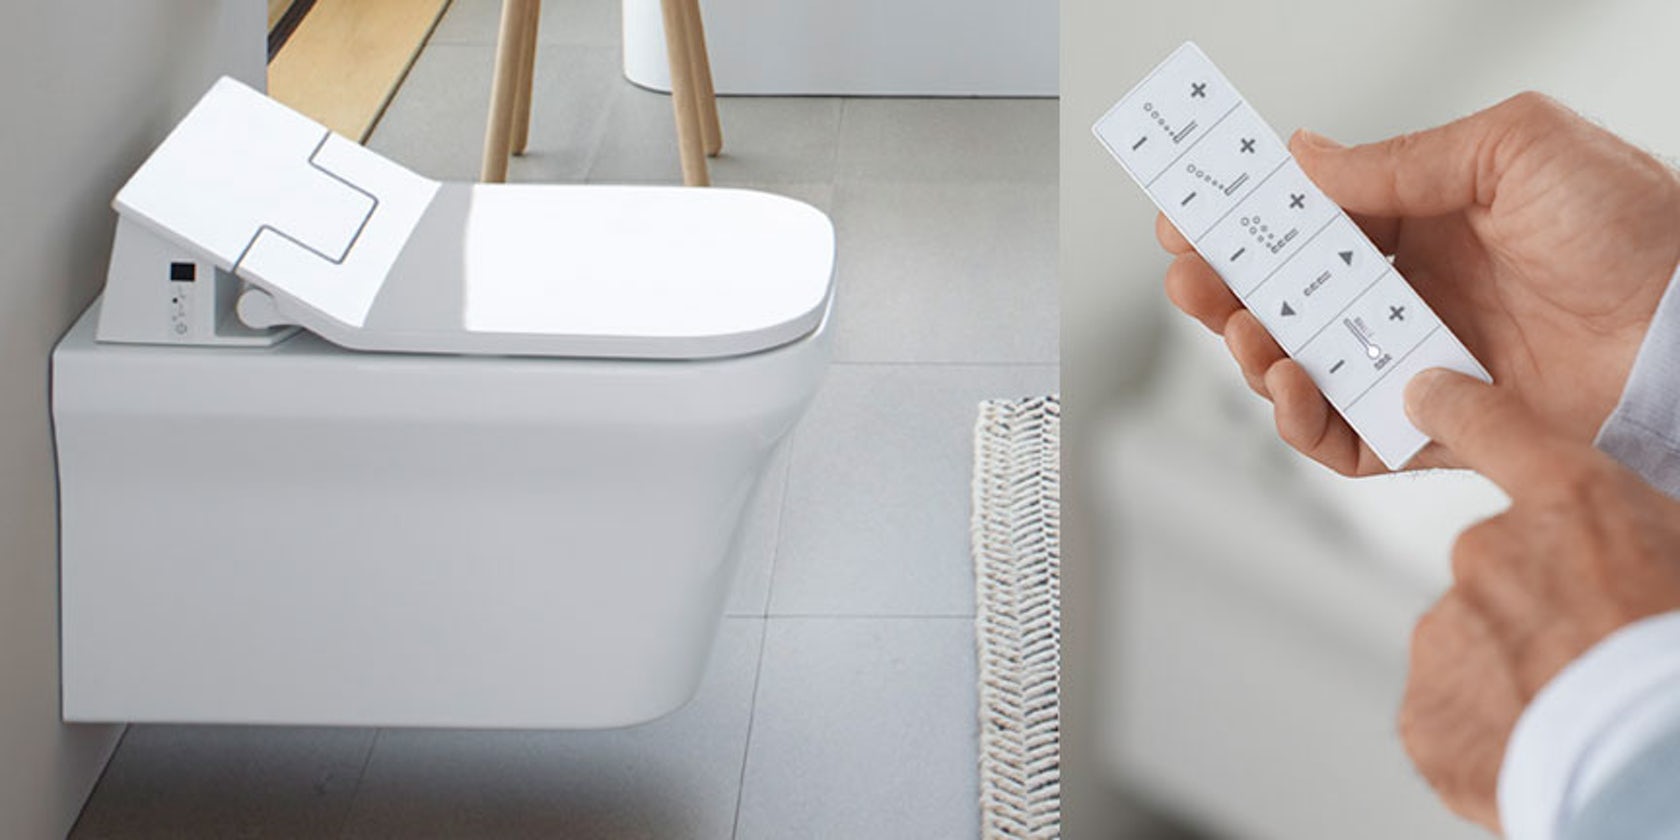 How to Choose the Right Smart Toilet